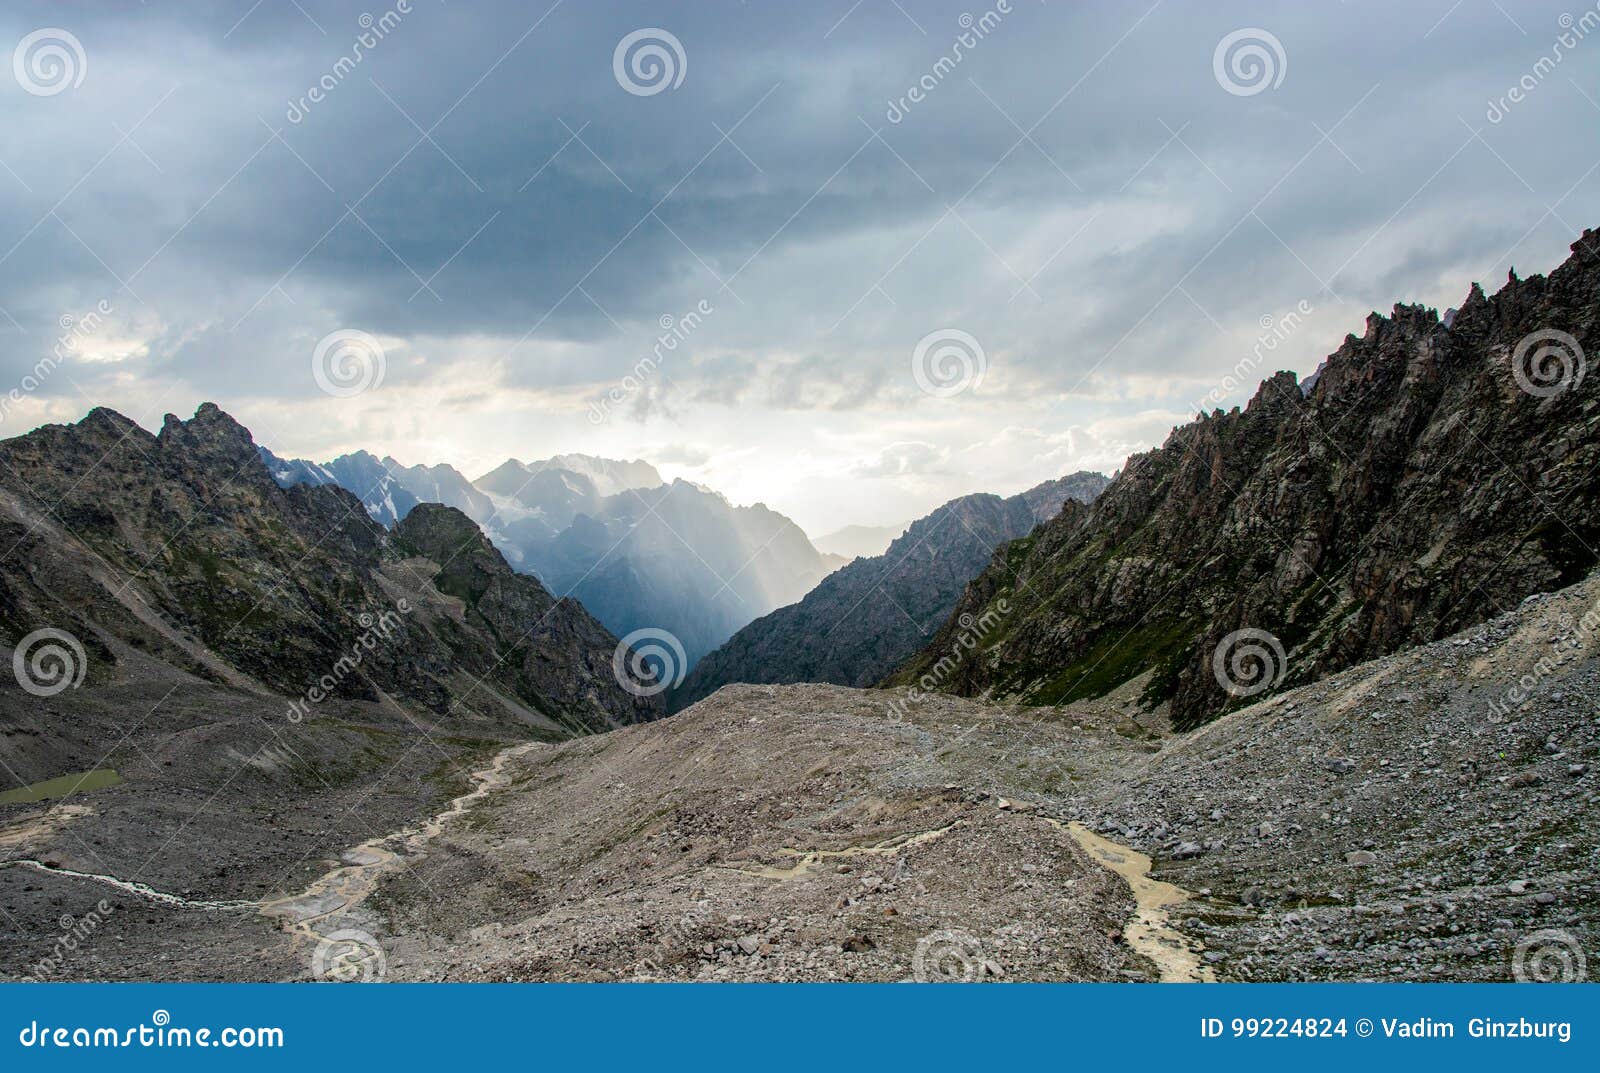 Amazing Landscape of Rocky Mountains and Blue Sky, Caucasus, Russia ...